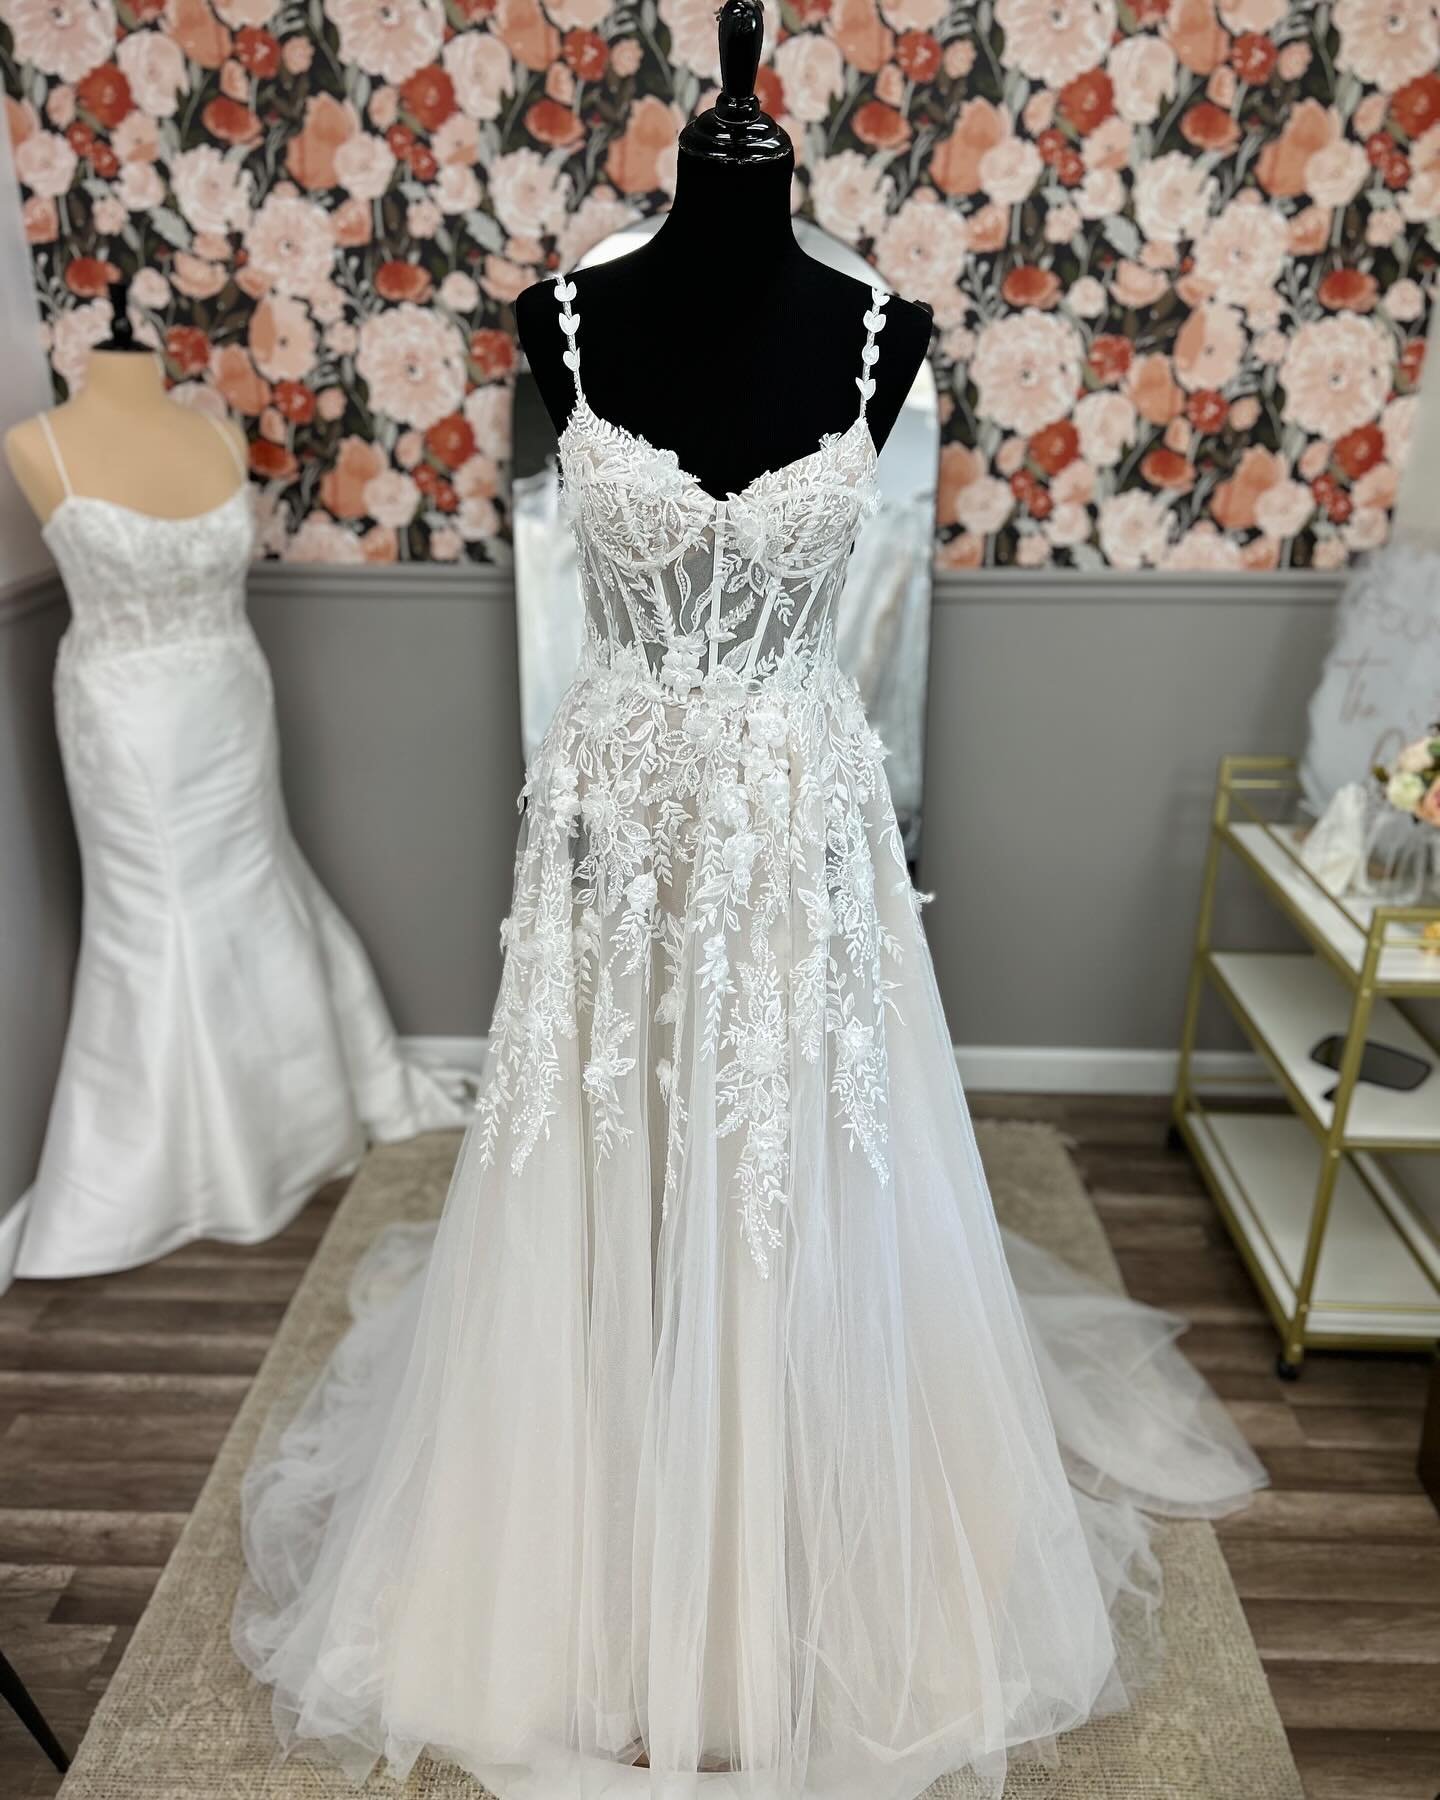 An exotic A-line with a fun twist for #WeddingGownWednesday

Originally: $2,399
Now: $1,599
Size 10